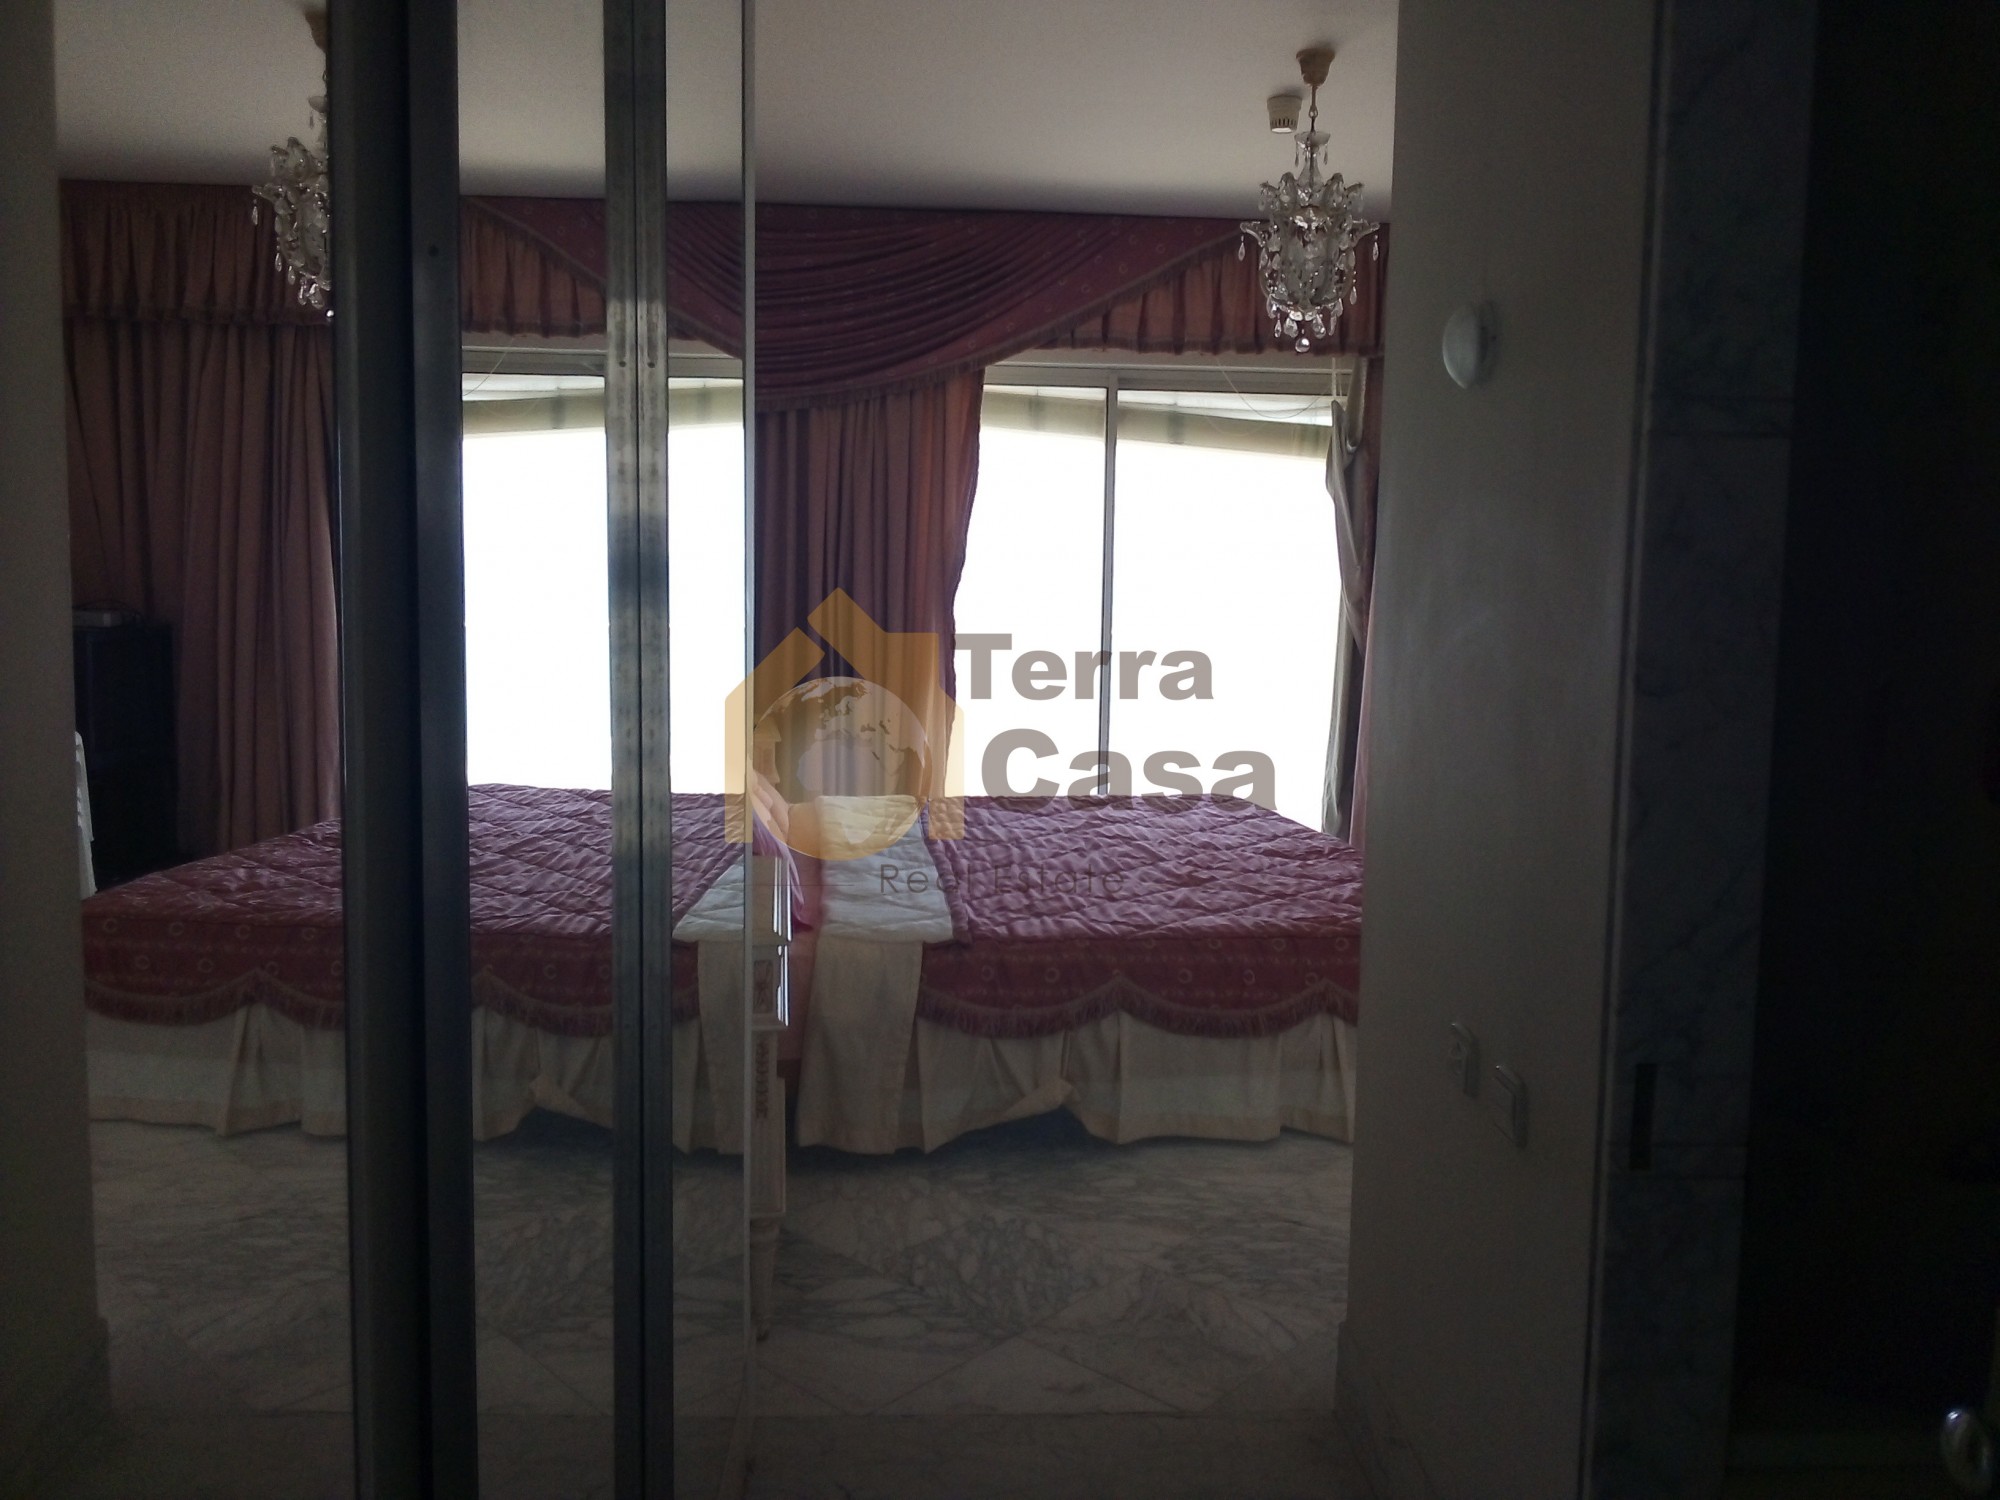 Apartment for rent in ramlet el baida fully furnished with open sea view .